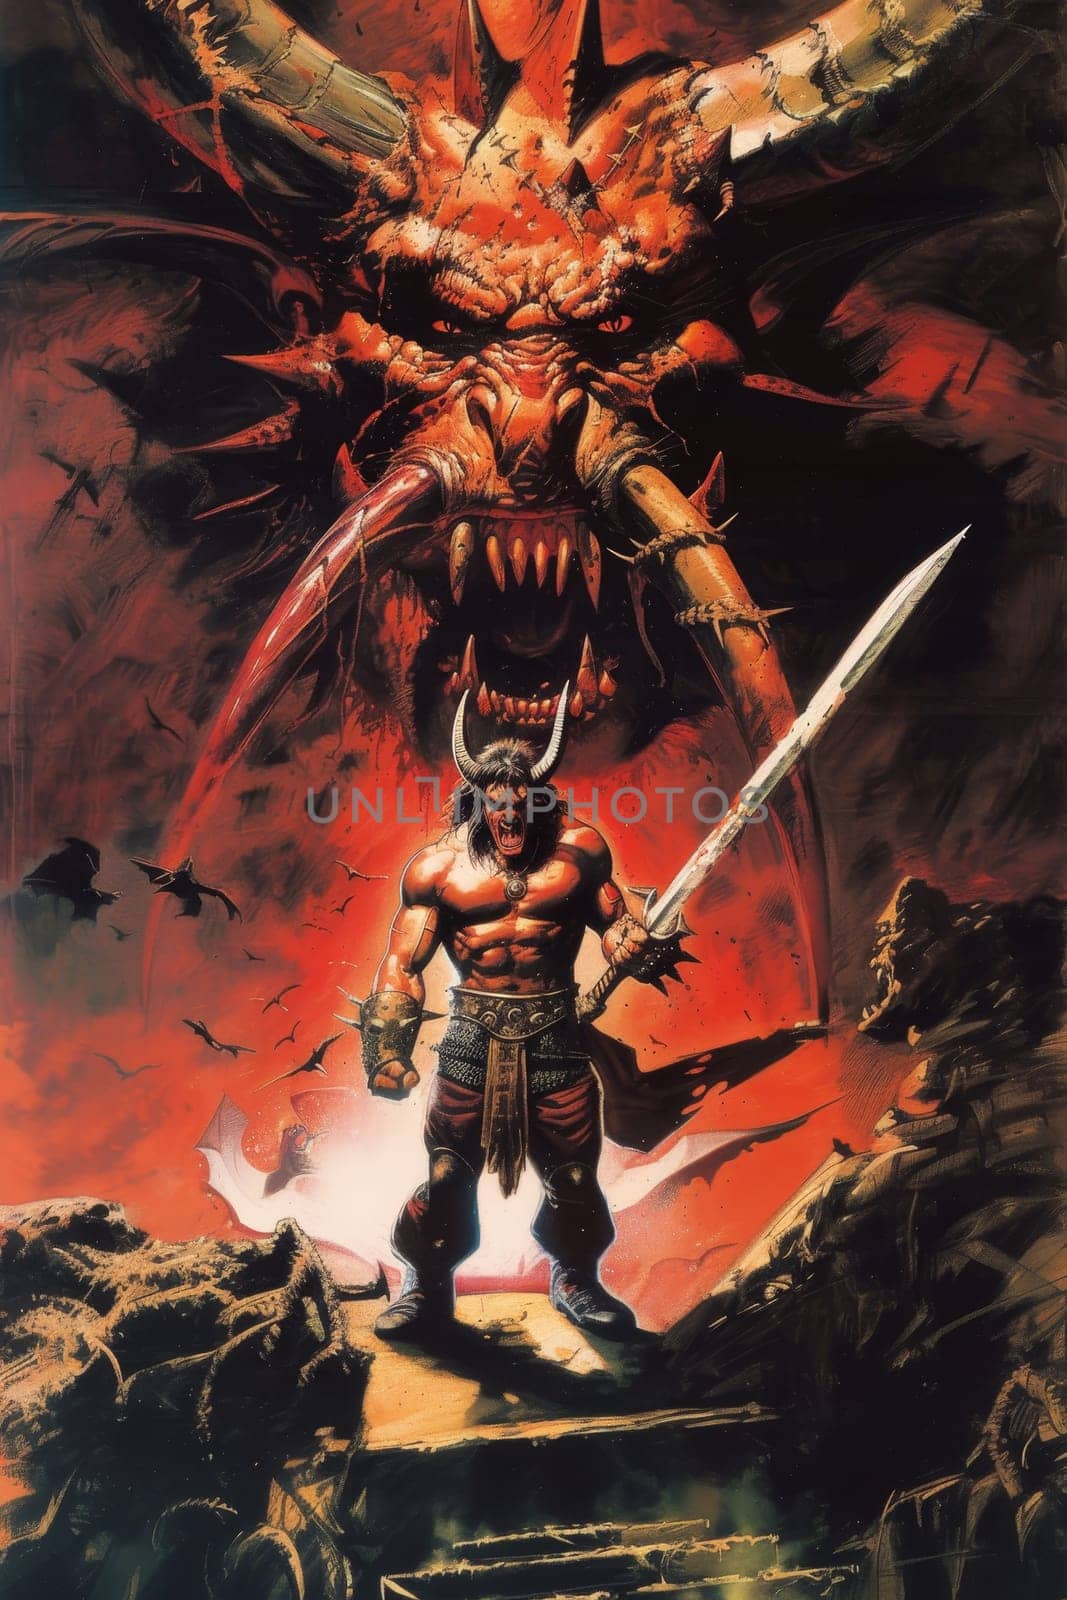 Warrior with sword stands defiantly before a gigantic demon in a fiery hellscape